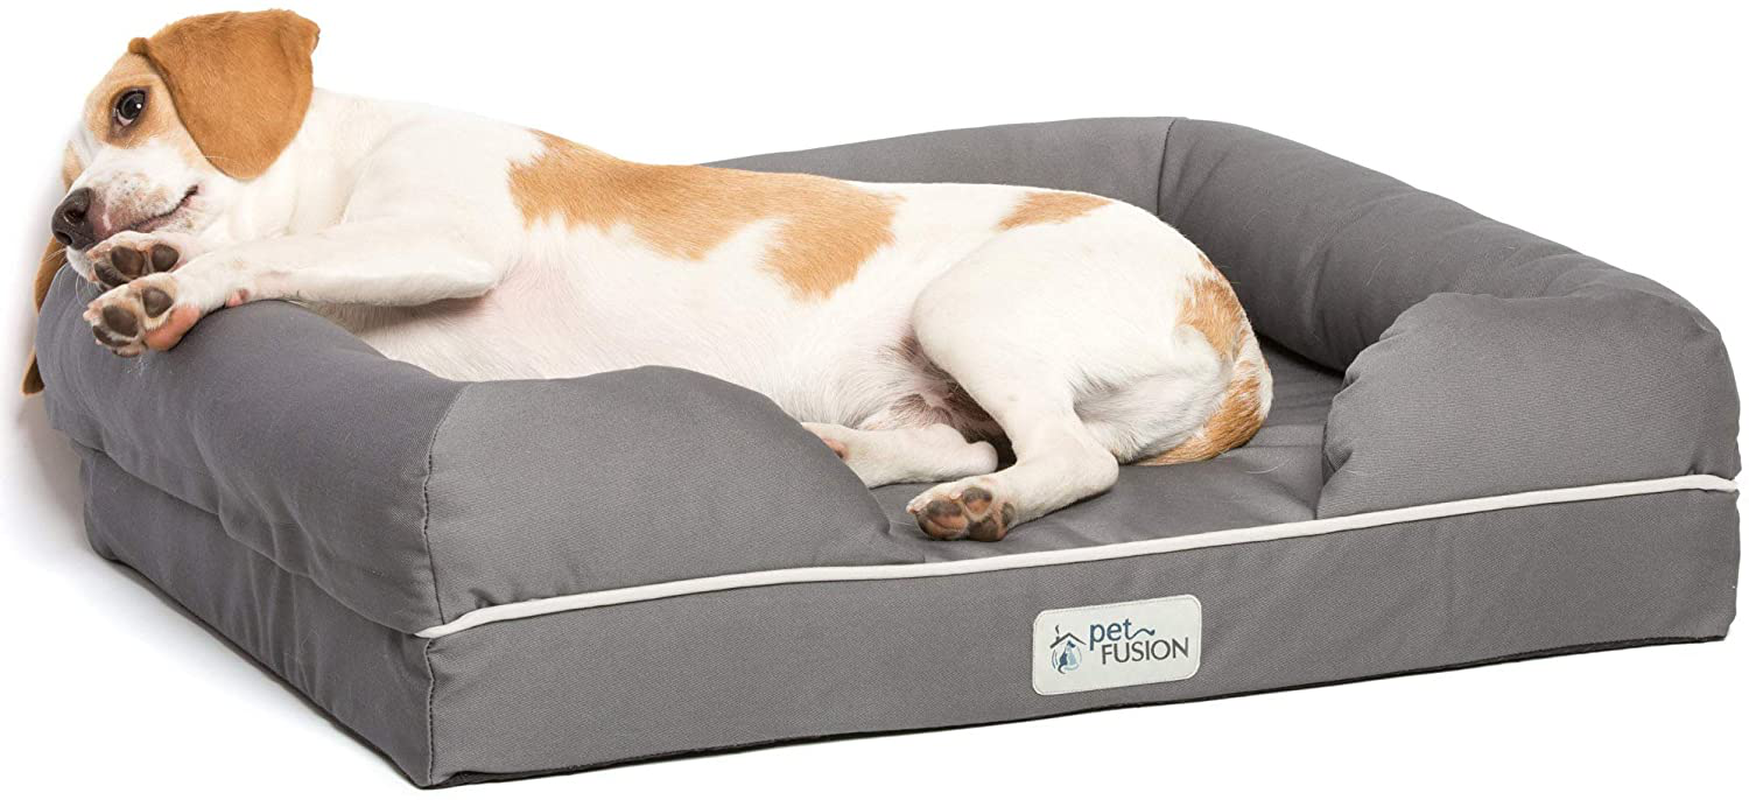 Petfusion Ultimate Orthopedic Dog Bed | Solid Certipur-Us Memory Foam | Multiple Sizes/Colors, Medium Firmness Bolster, Waterproof Liner, Breathable 35% Cotton Cover | Cert. Skin Safe | 3Yr Warranty Animals & Pet Supplies > Pet Supplies > Cat Supplies > Cat Beds PetFusion Slate Grey Small (25x20") 